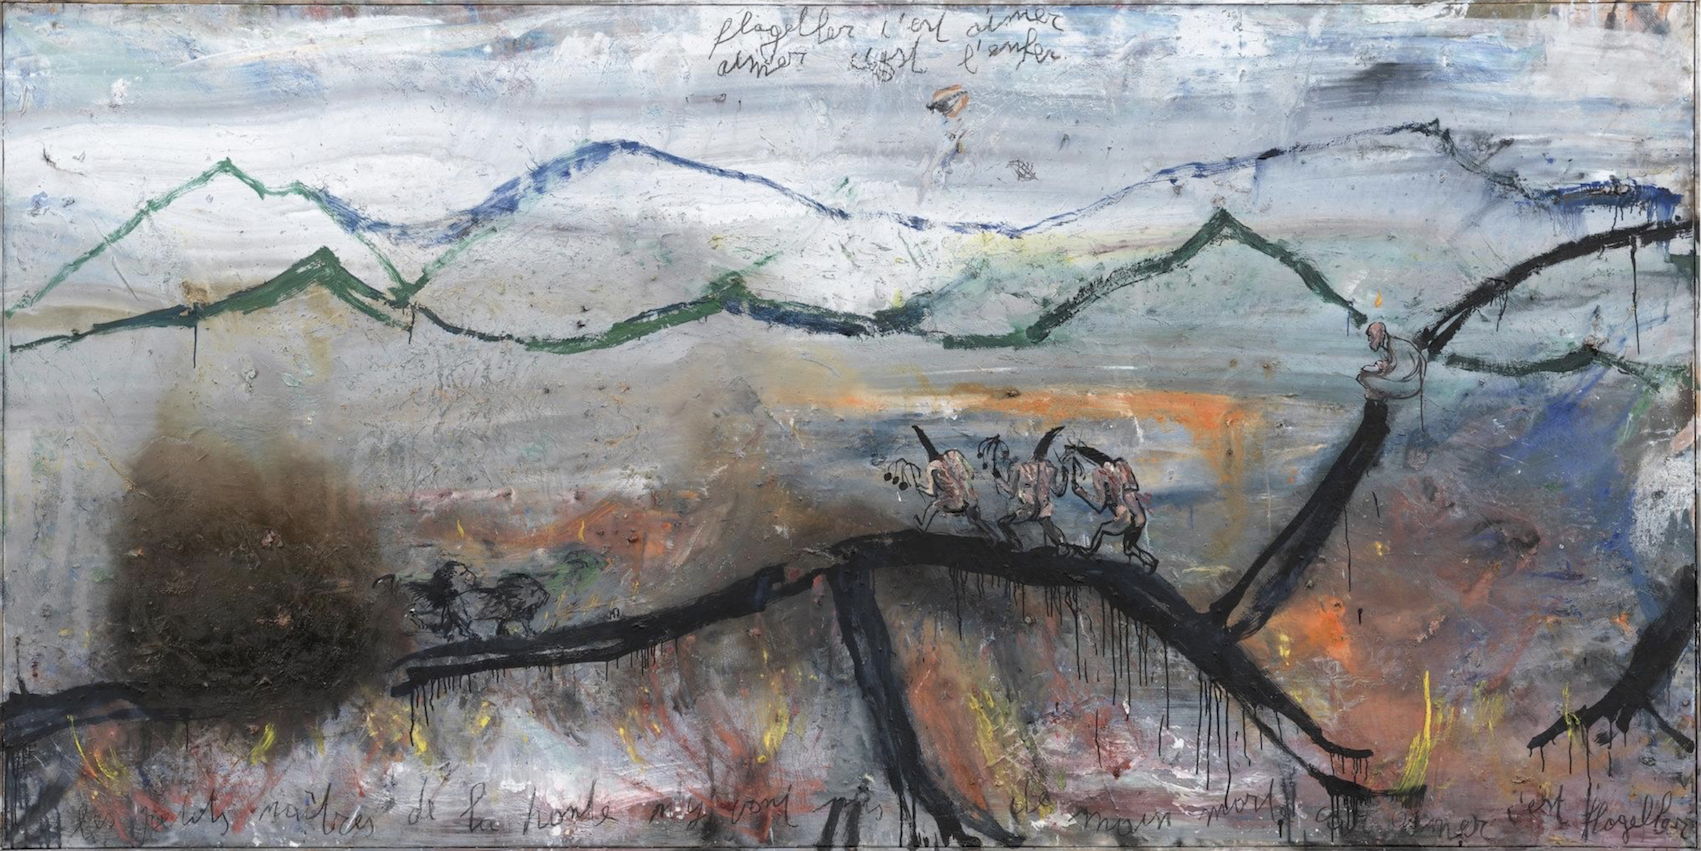 PHILIPPE VANDENBERG (1952–2009), Aimer c'est flageller II (To Love is to Flagellate II), 1981–1998.152 x 302 cm, Oil and Charcoal on canvas. © The Estate of Philippe Vandenberg / Courtesy Hauser & Wirth